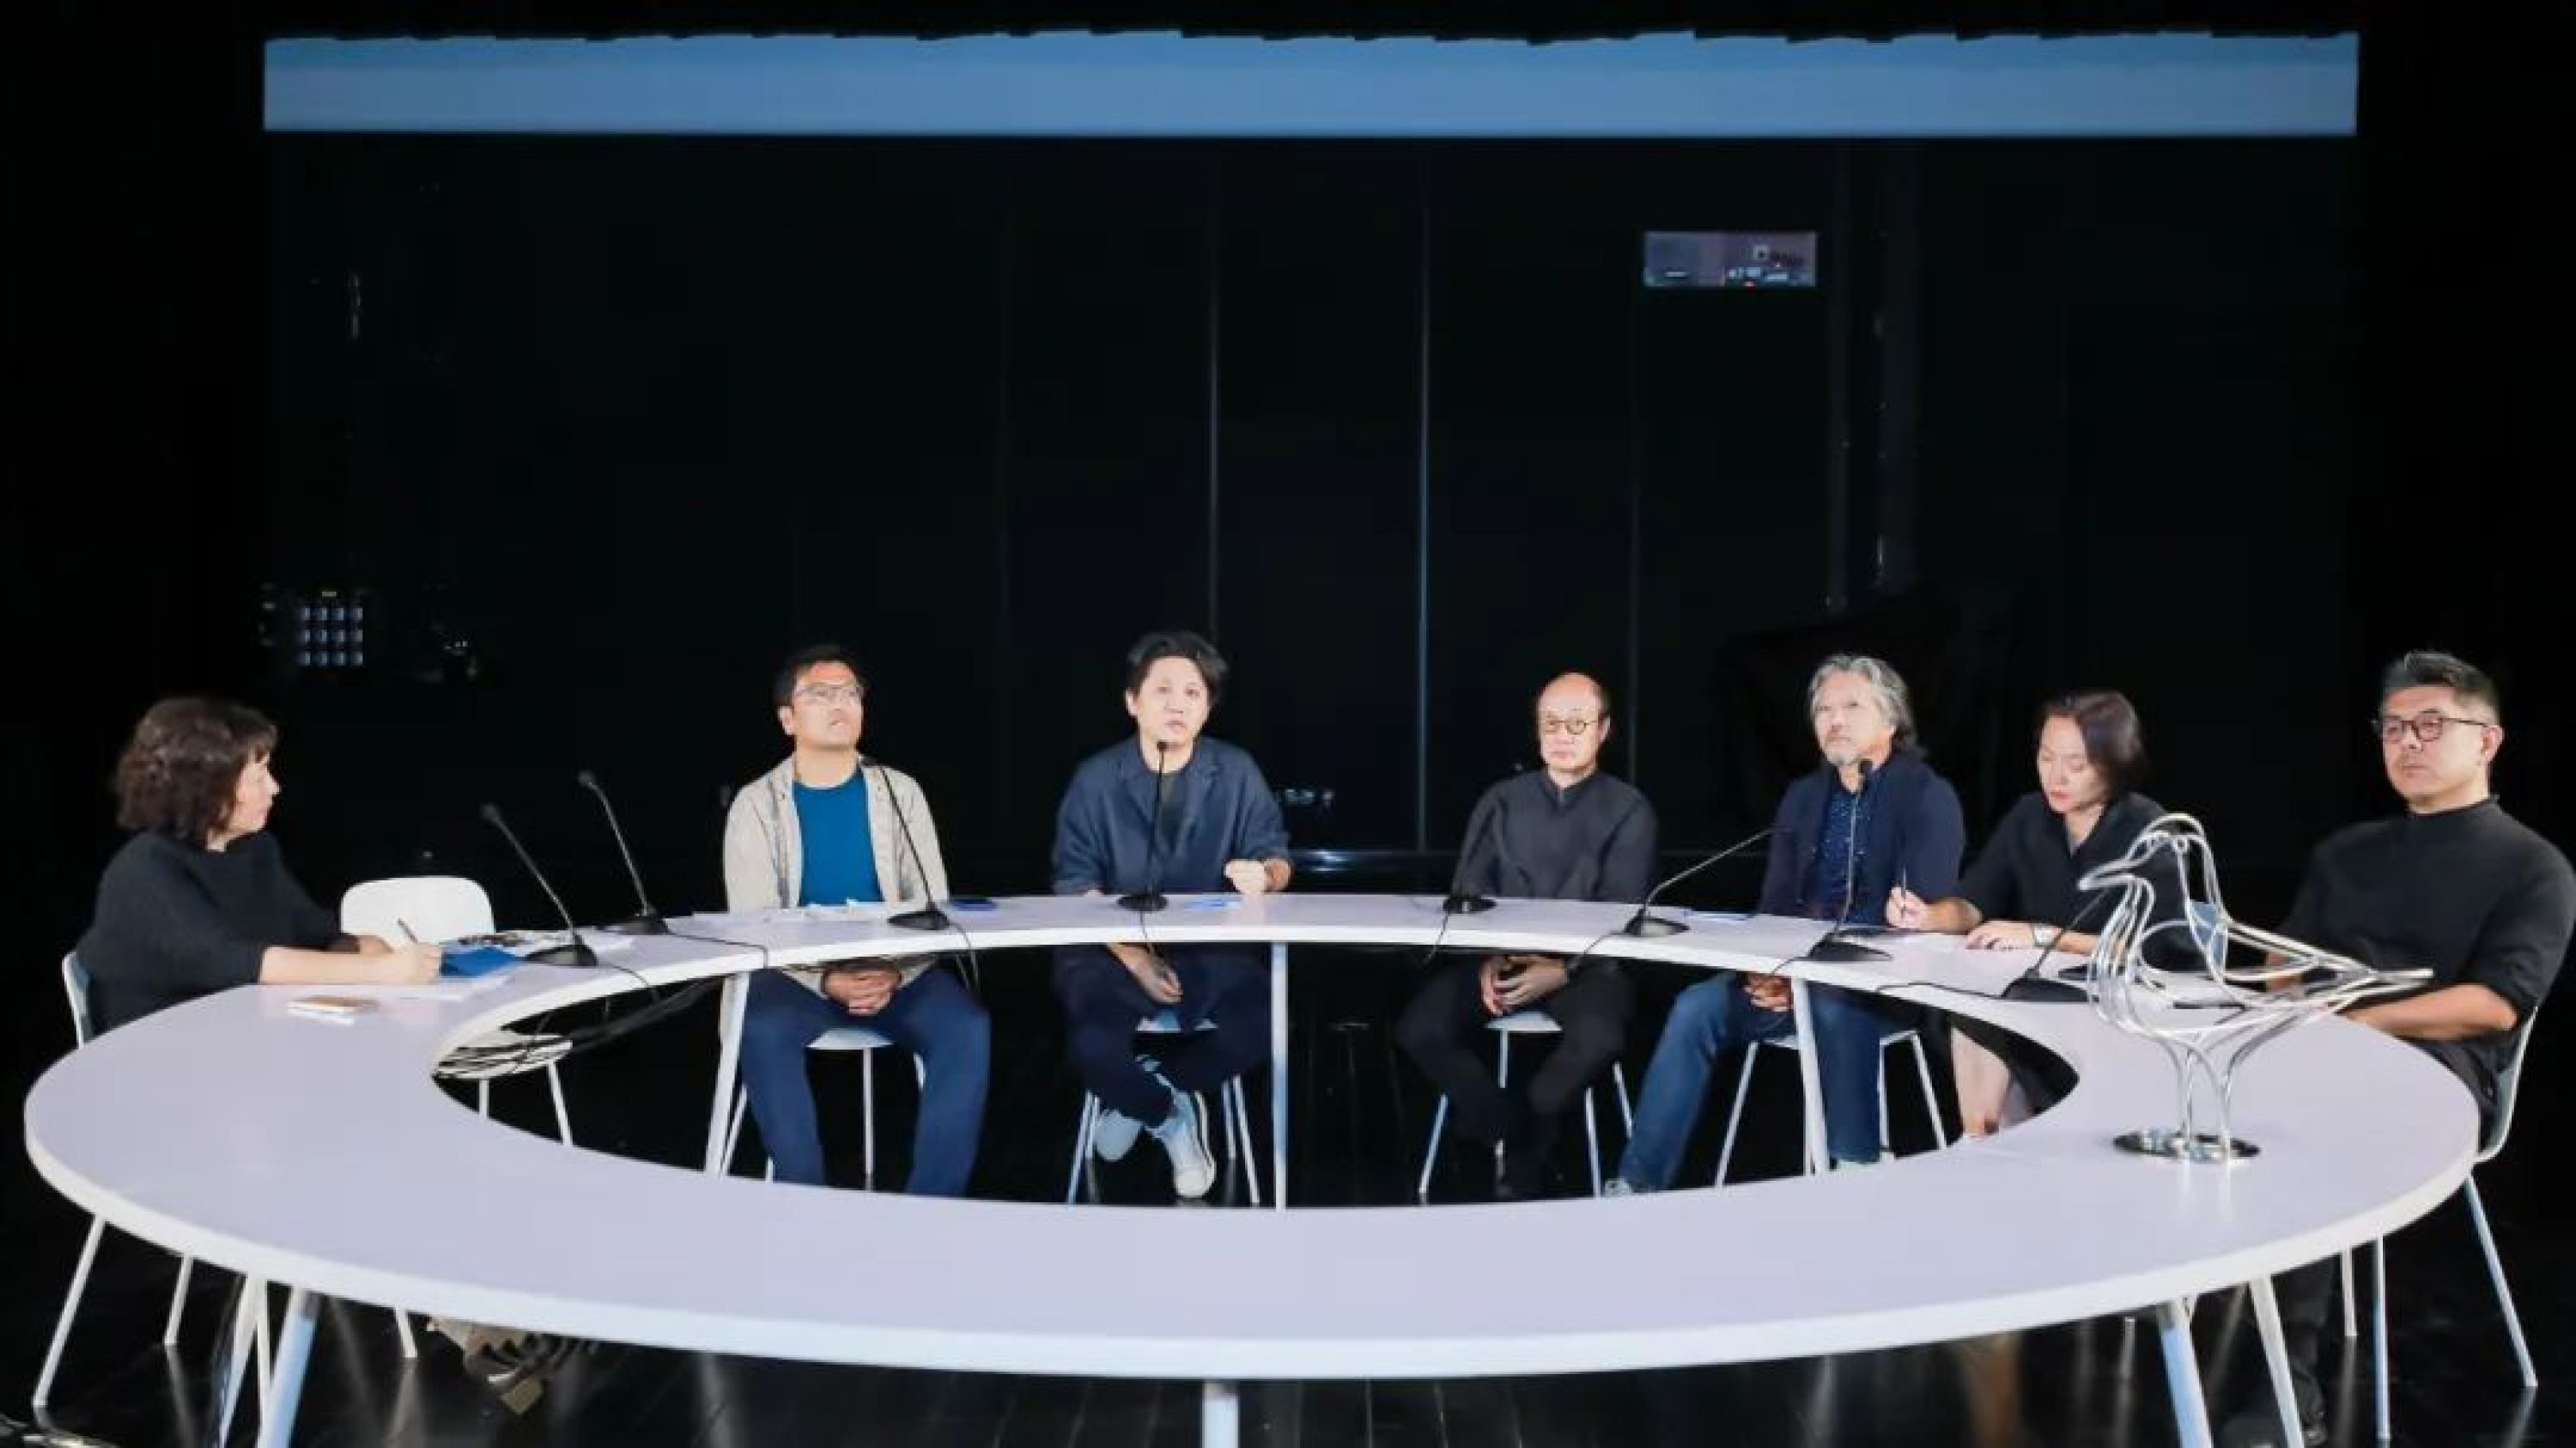 Zigeng Wang was Invited to Participate in the Roundtable Forum of the “Ma Yansong: Landscape in Motion" Exhibition, Titled “The Publicity of Cities and Buildings"